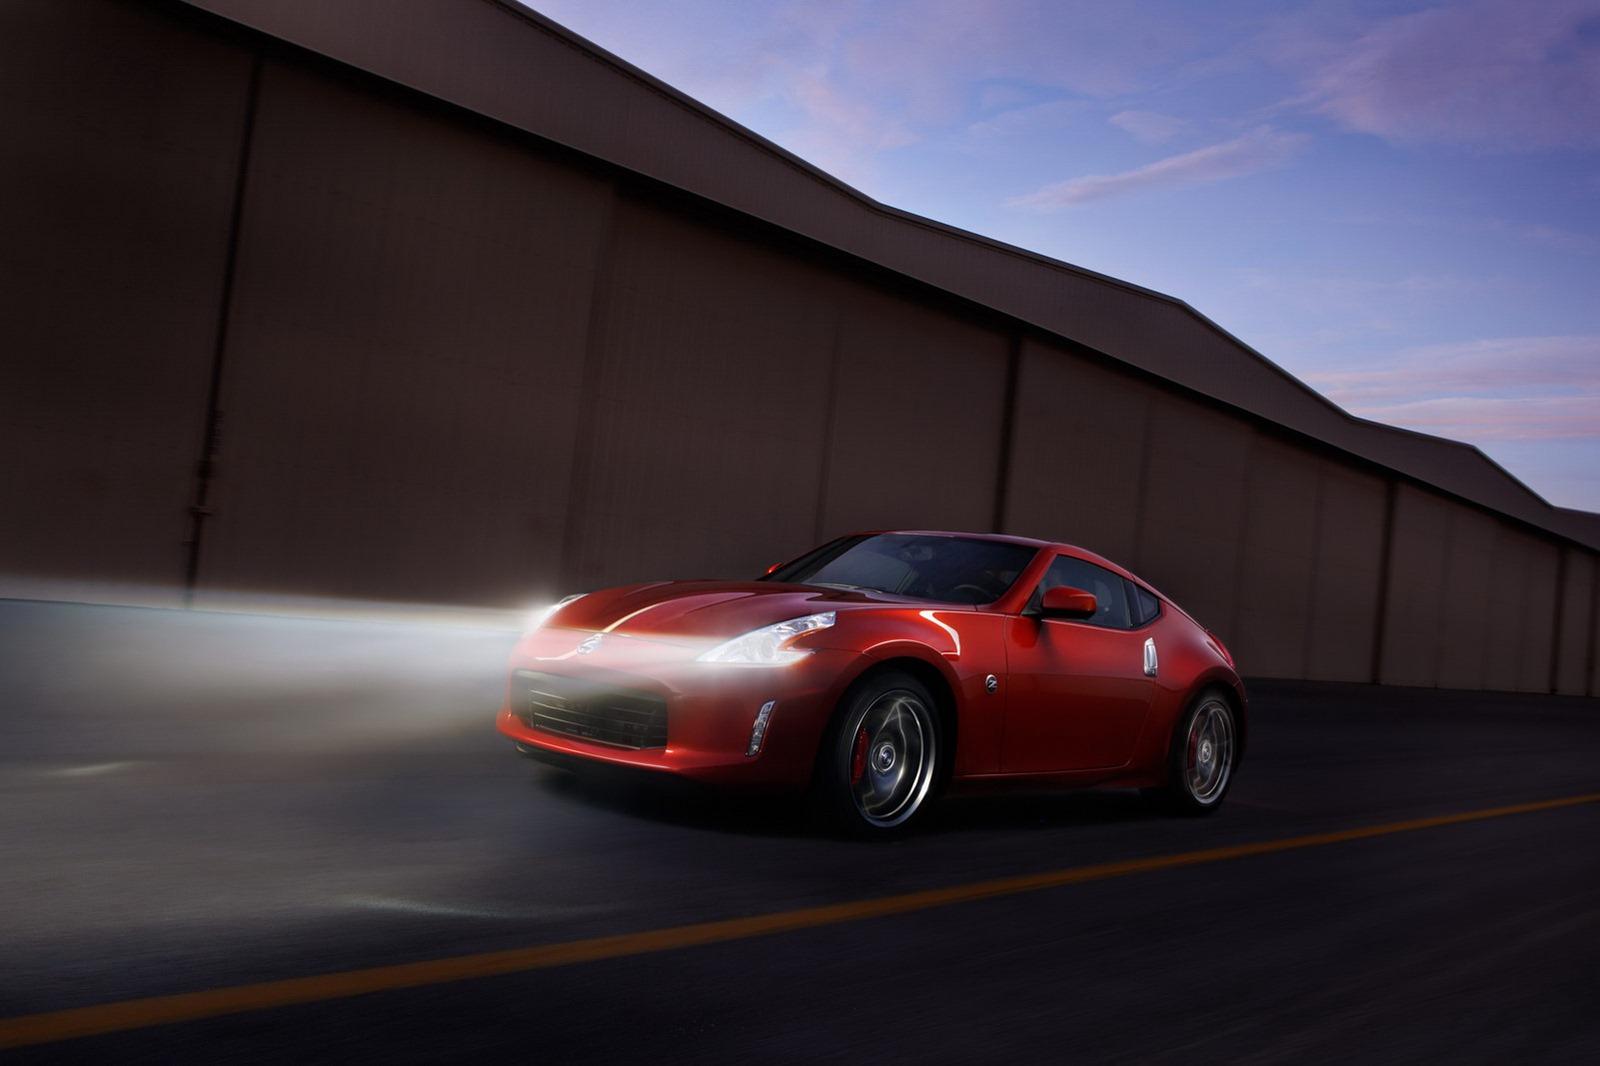 2013 Nissan 370Z Coupe